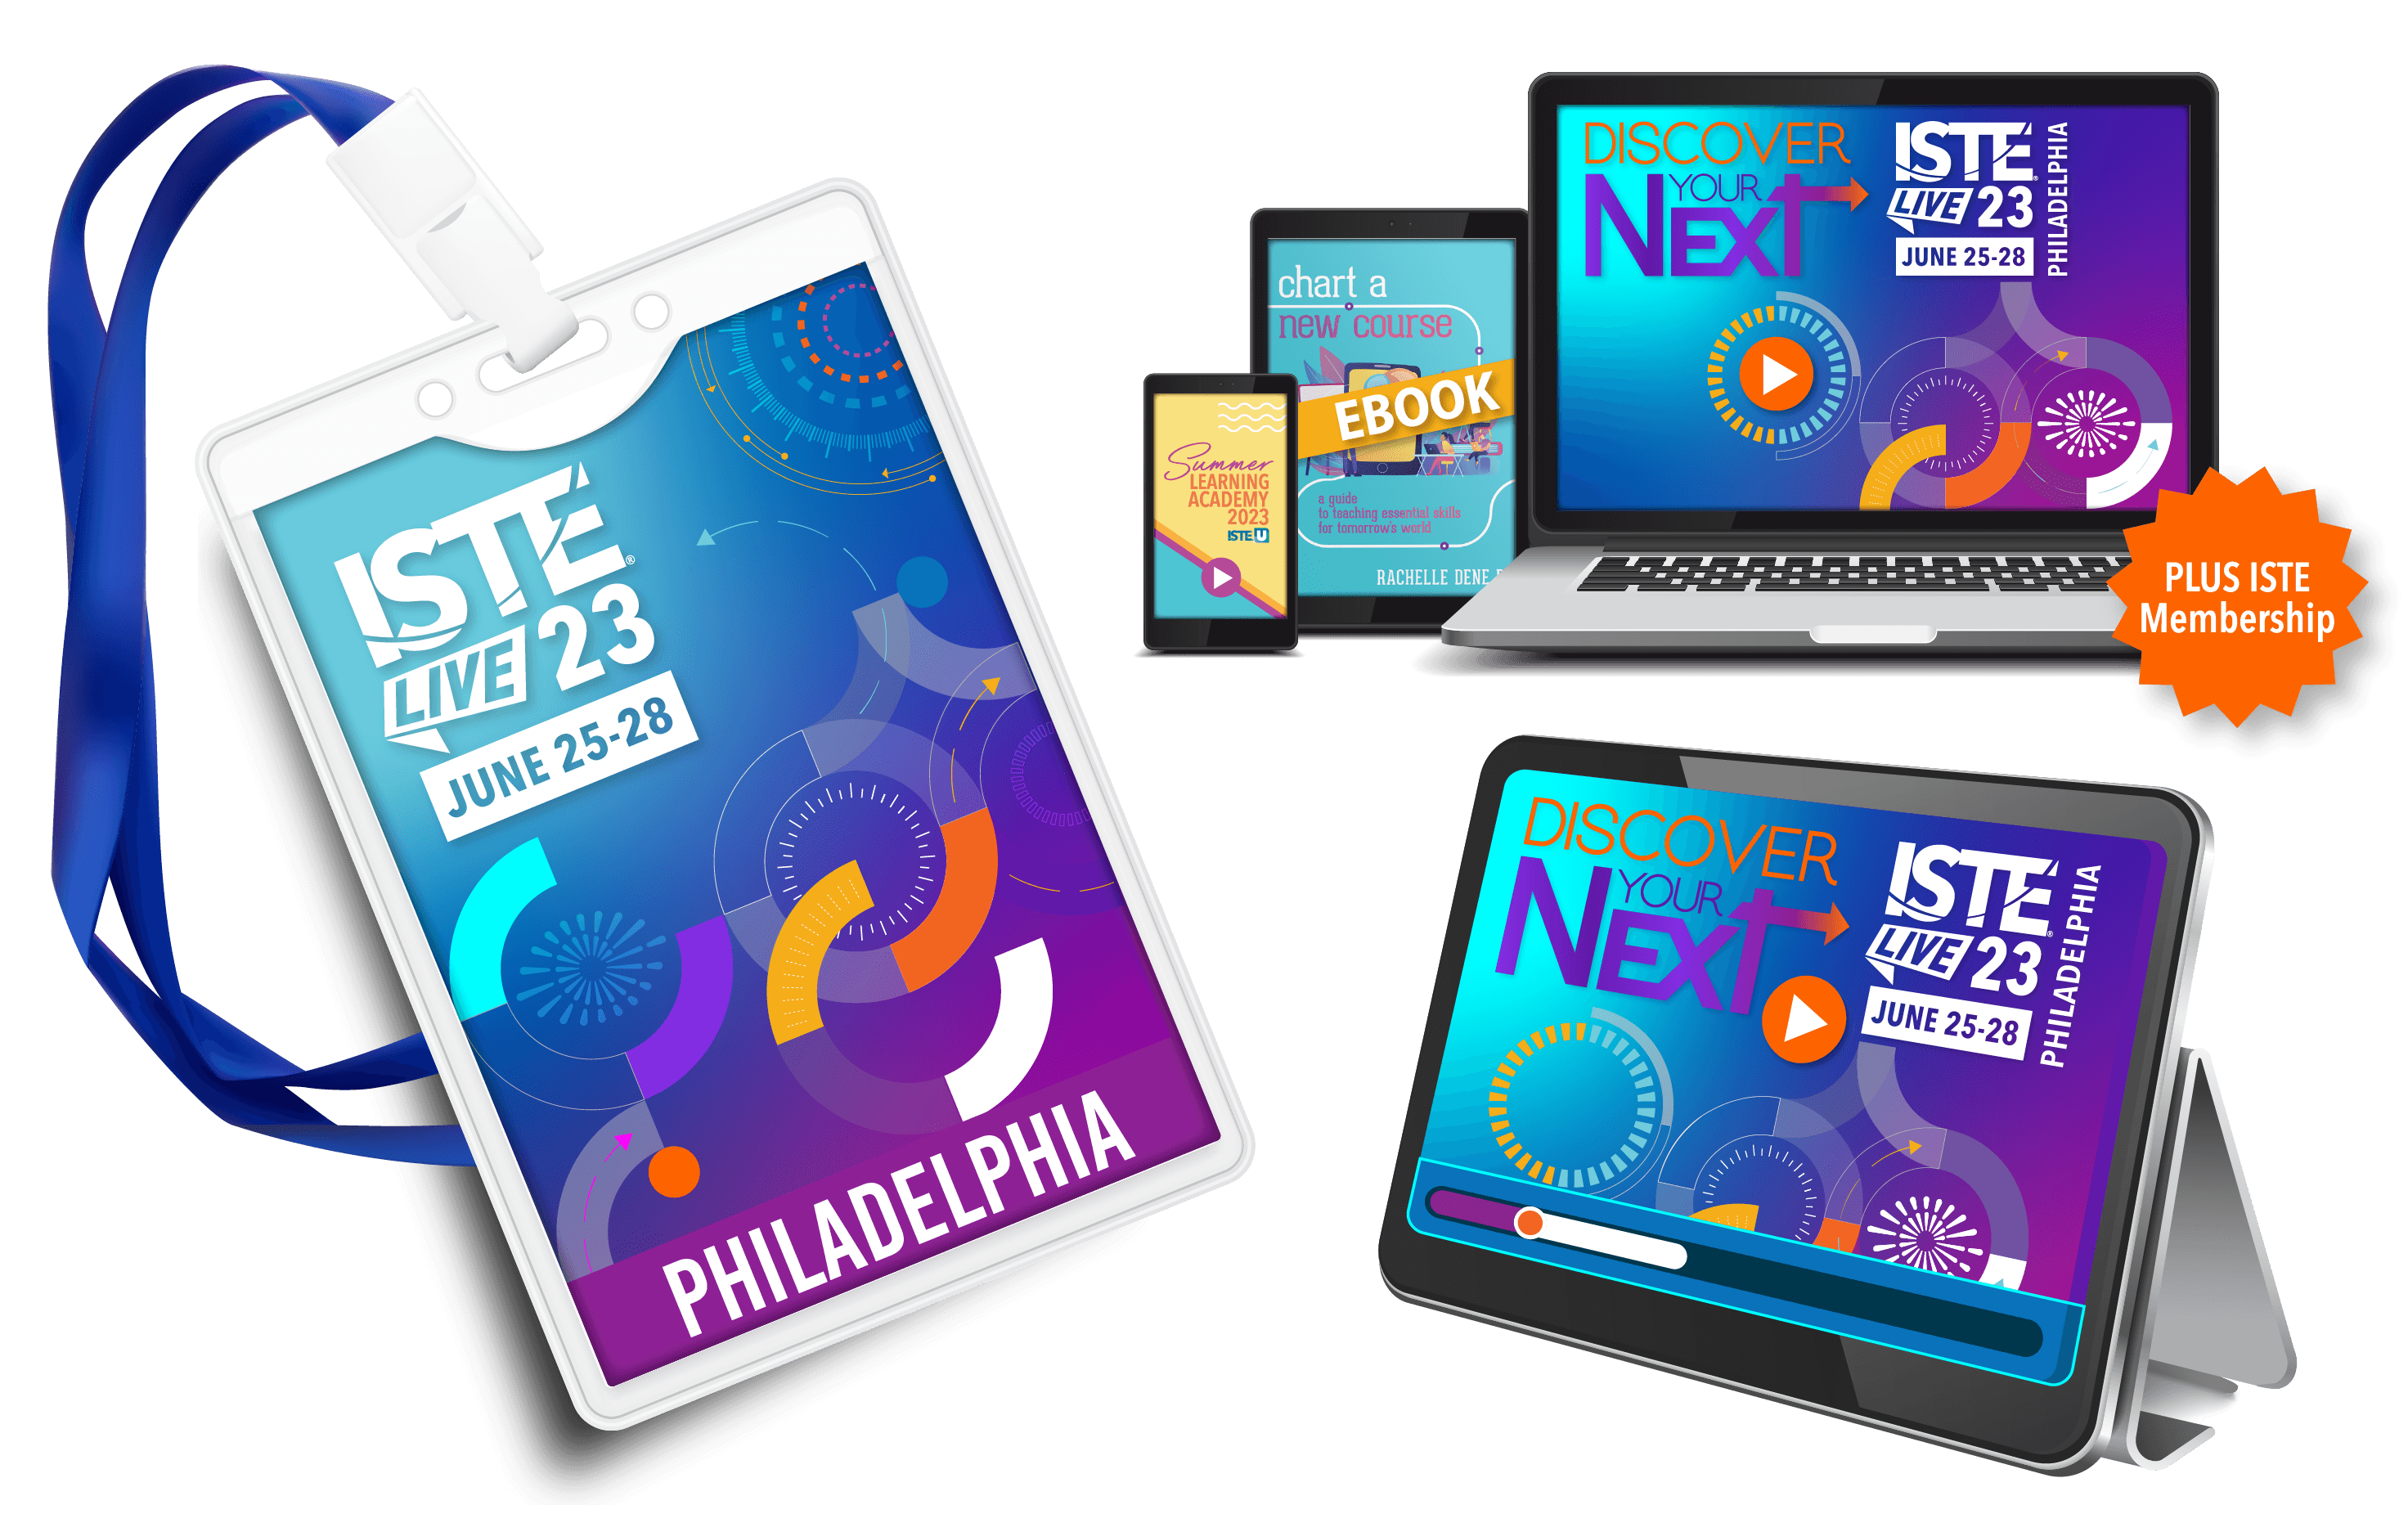 ISTE Live 23 has many registration options